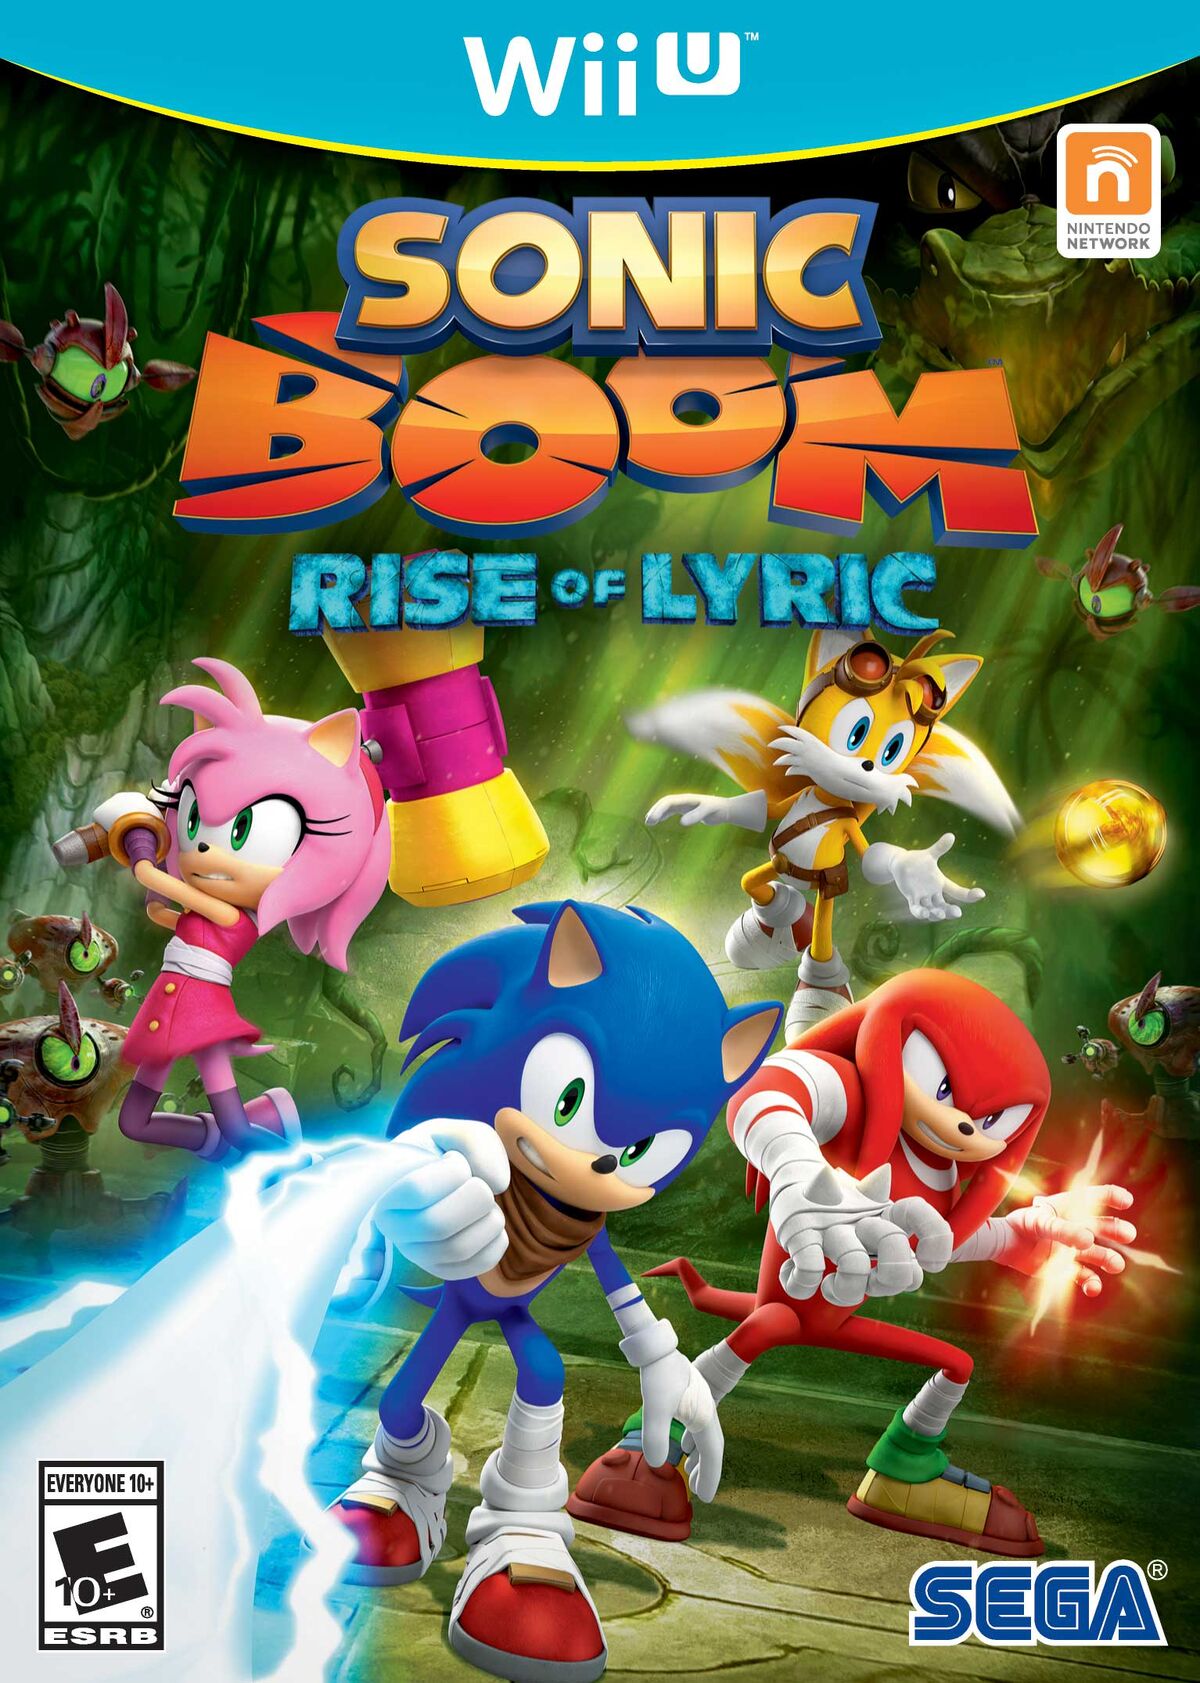 Sonic Boom (Video Game) - TV Tropes